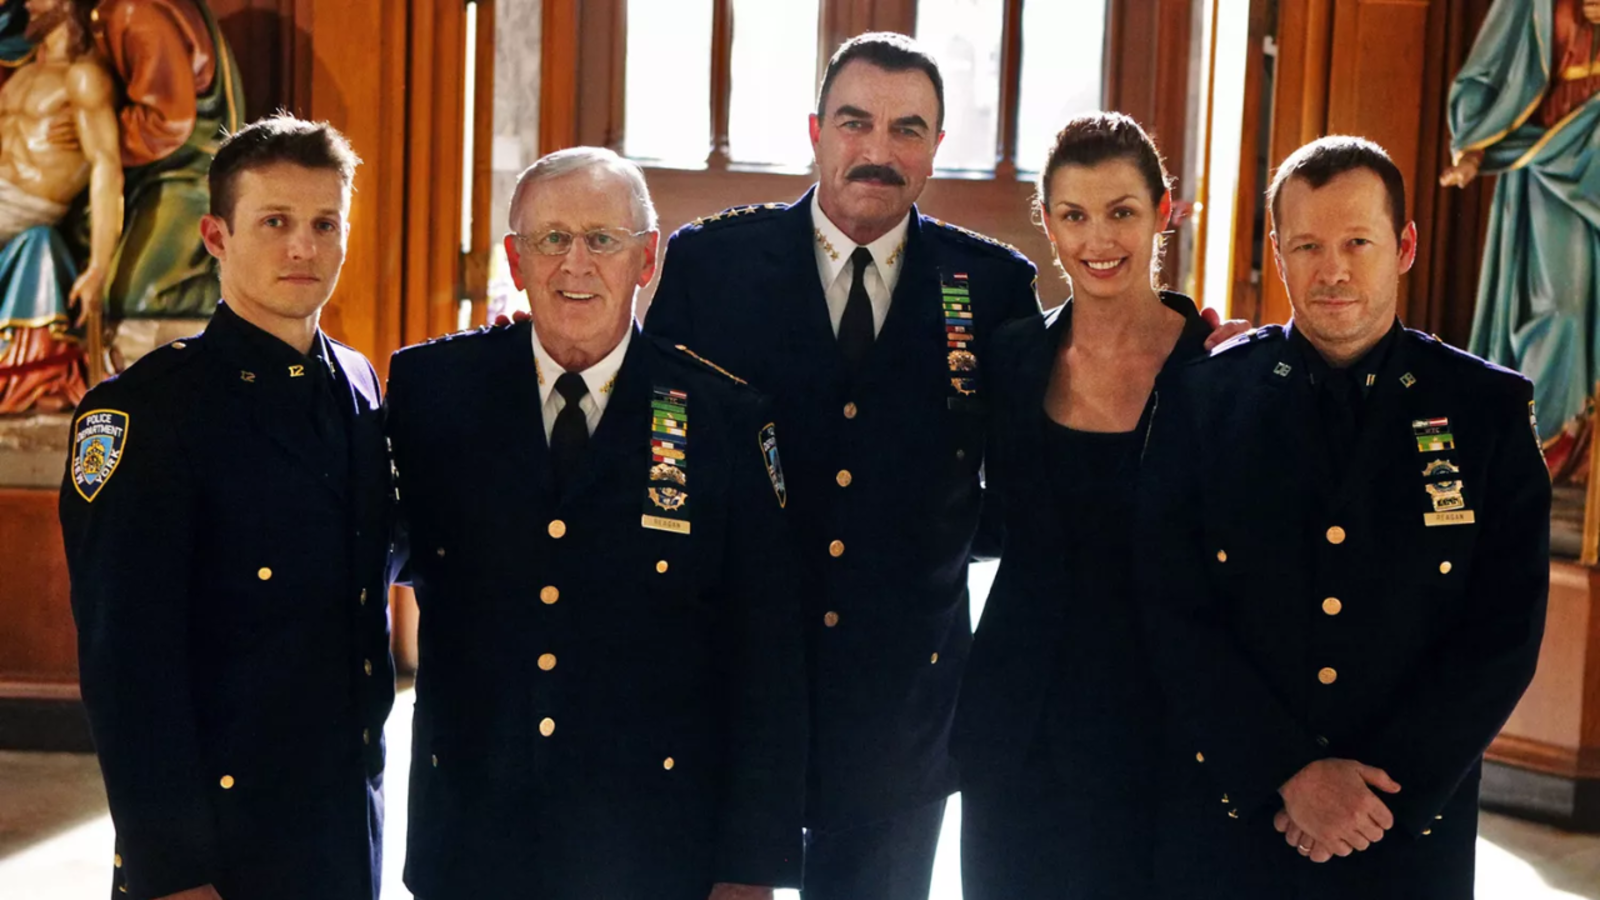 blue bloods season 14: Blue Bloods Season 14: Here's why the creators  decided to end the series - The Economic Times